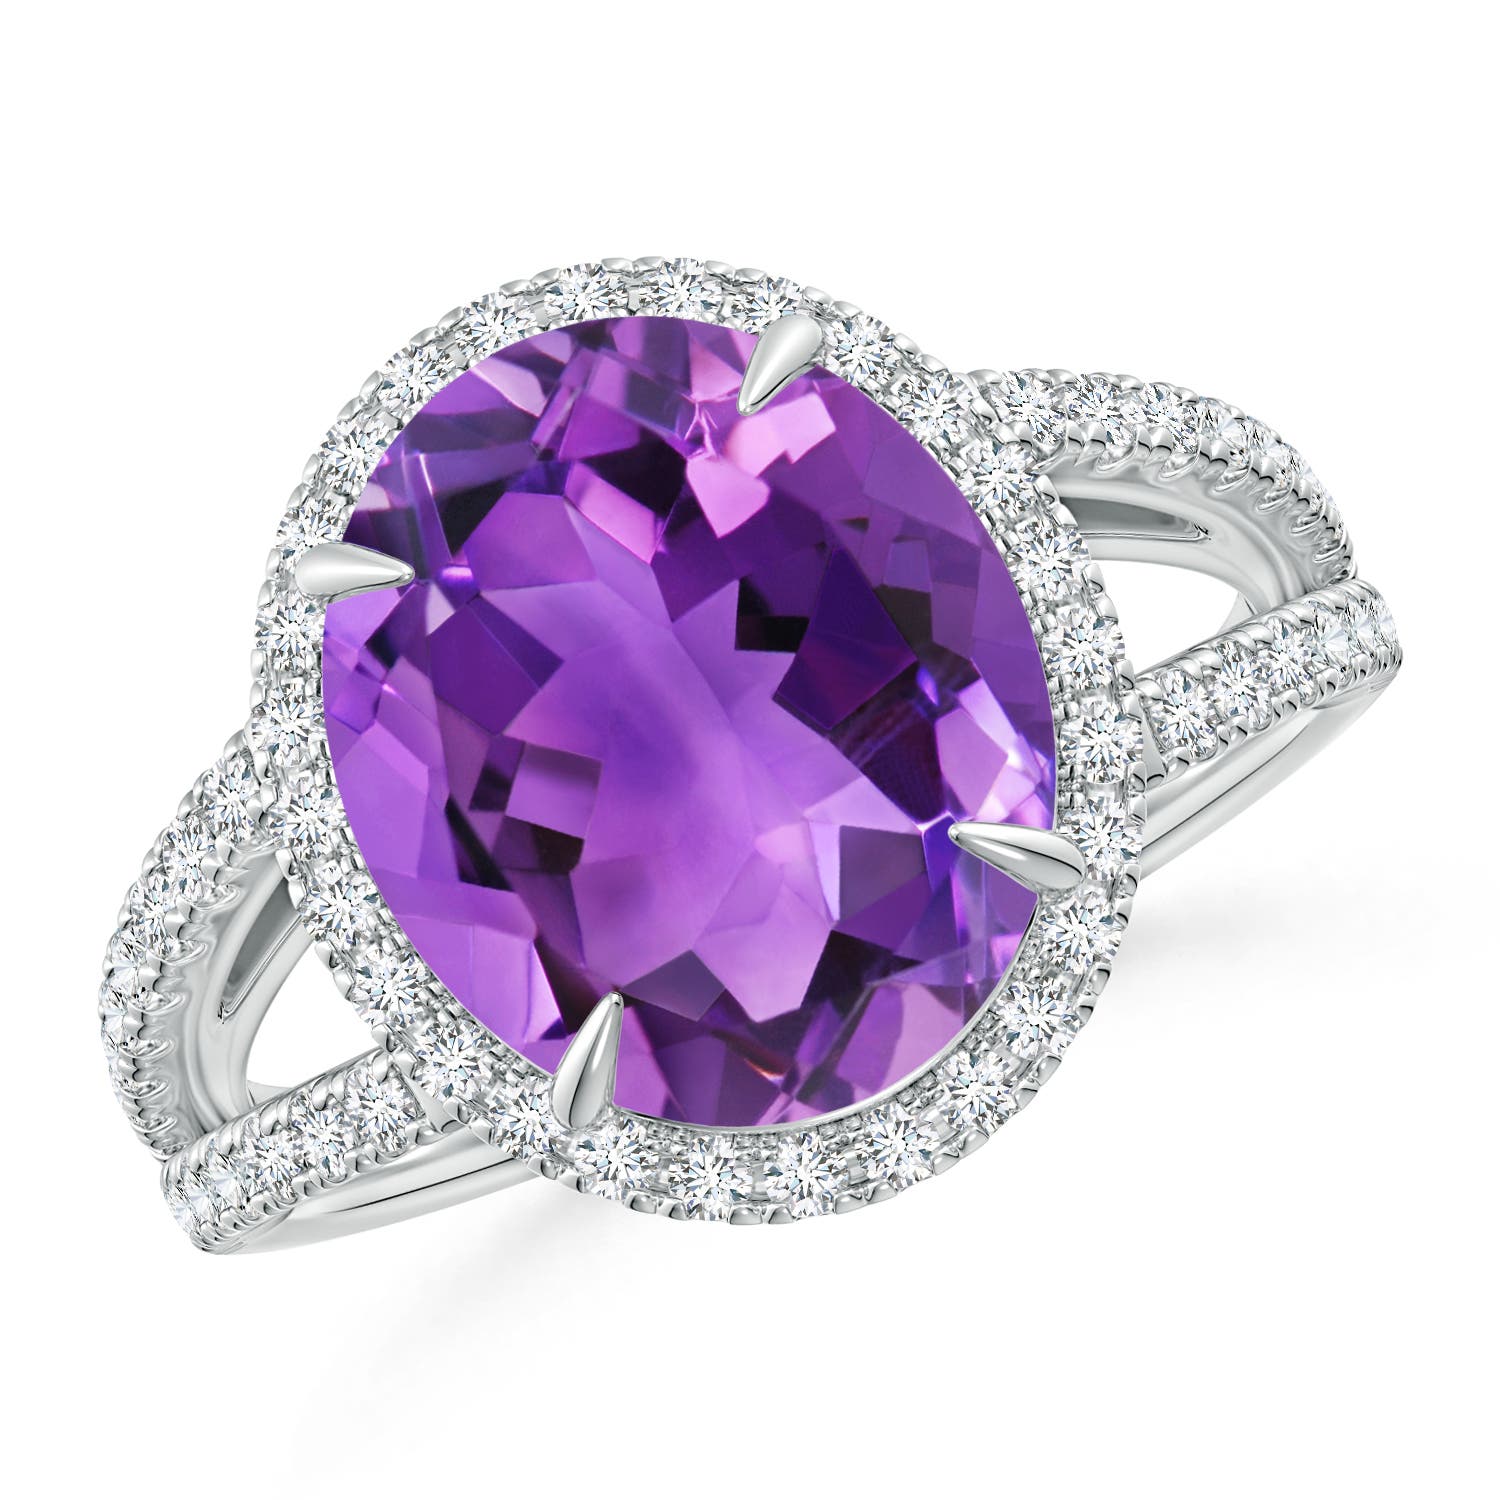 AAA - Amethyst / 4.84 CT / 14 KT White Gold